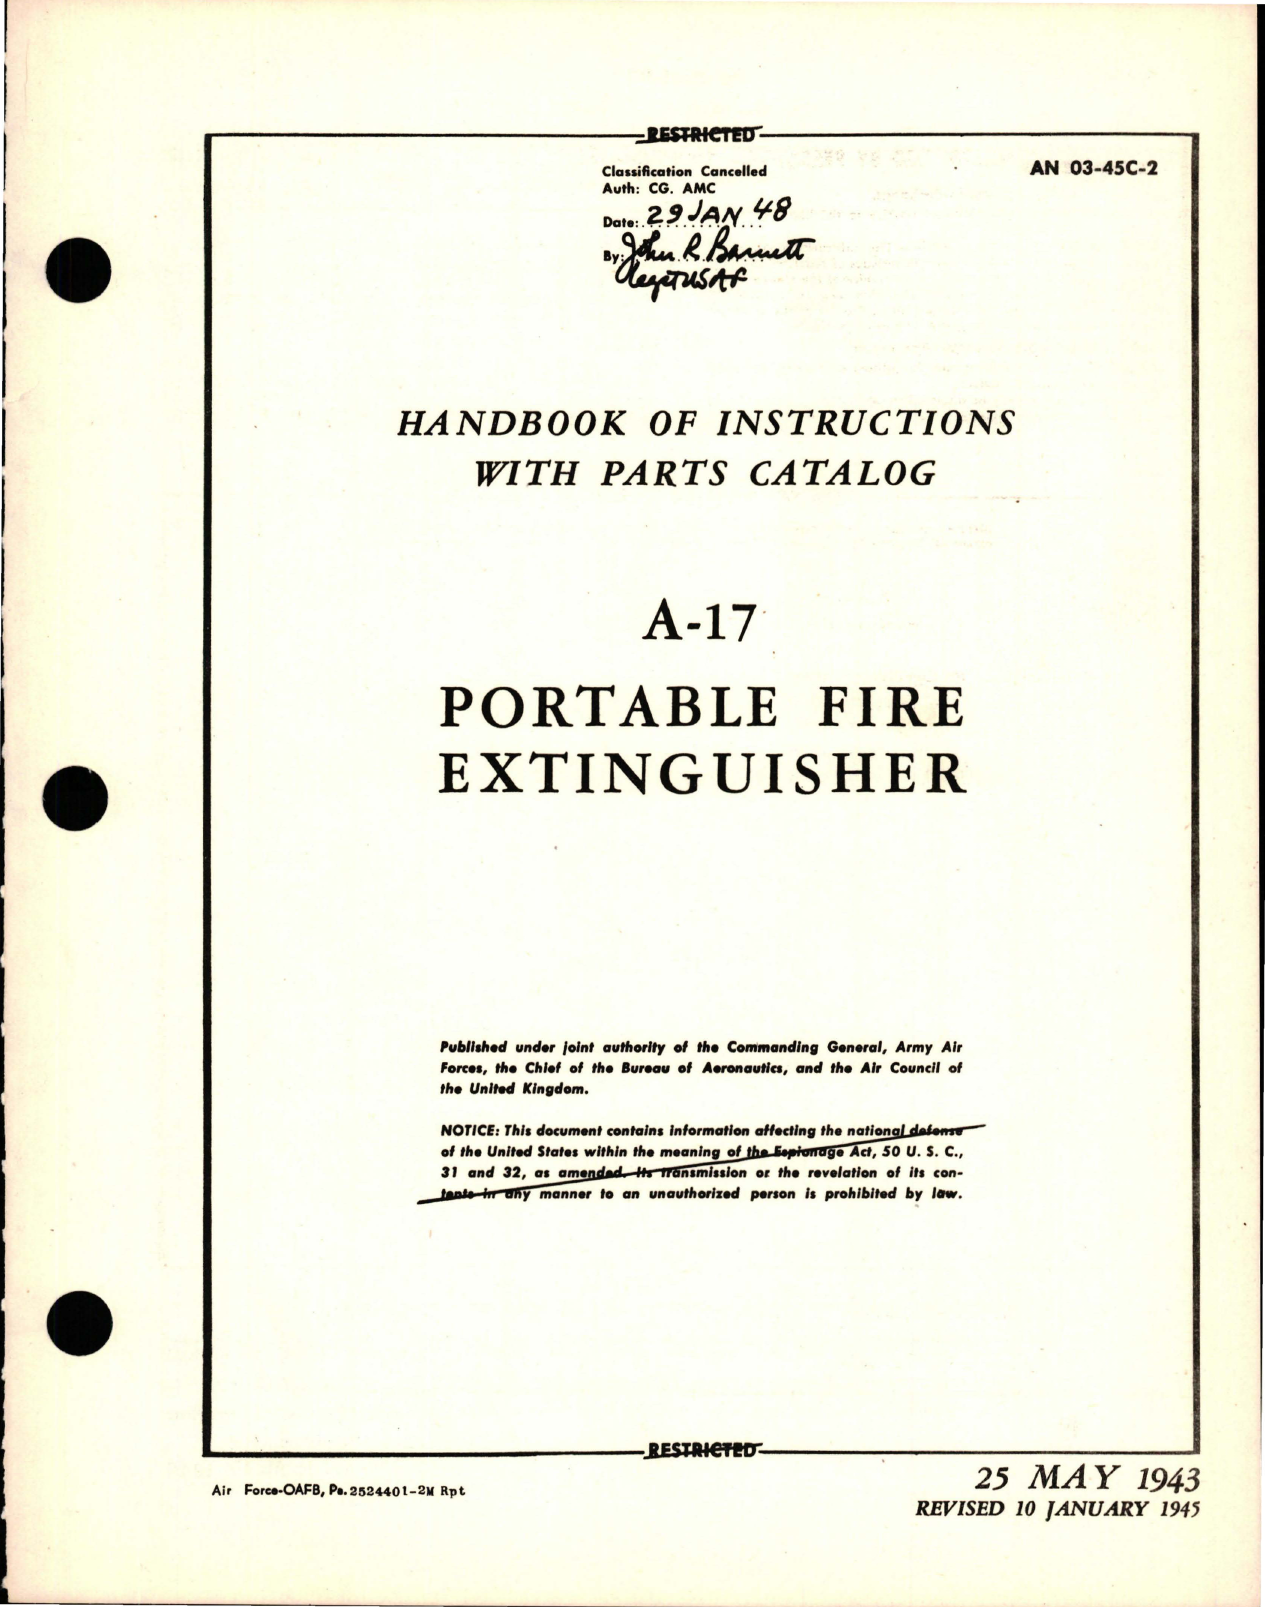 Sample page 1 from AirCorps Library document: Instructions with Parts Catalog for Portable Fire Extinguisher - A-17